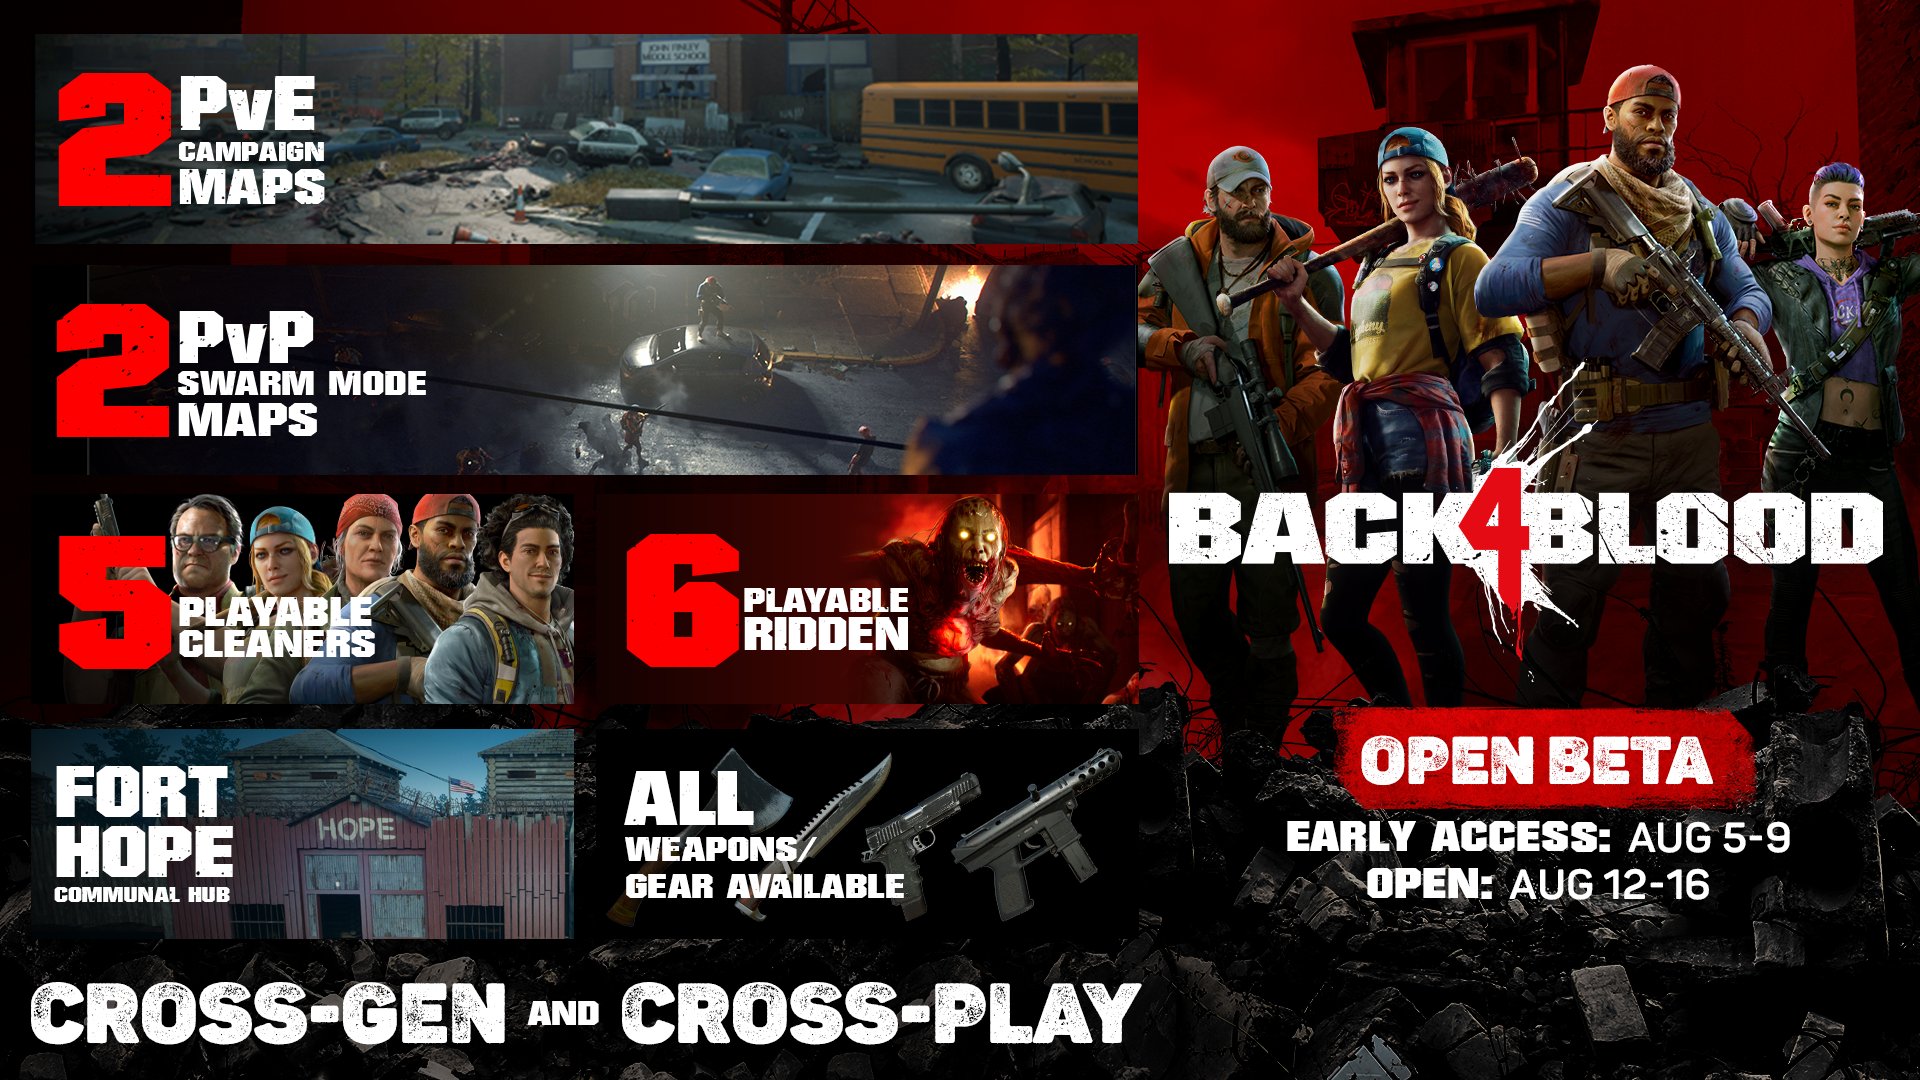 How to join The Finals open beta cross-platform event